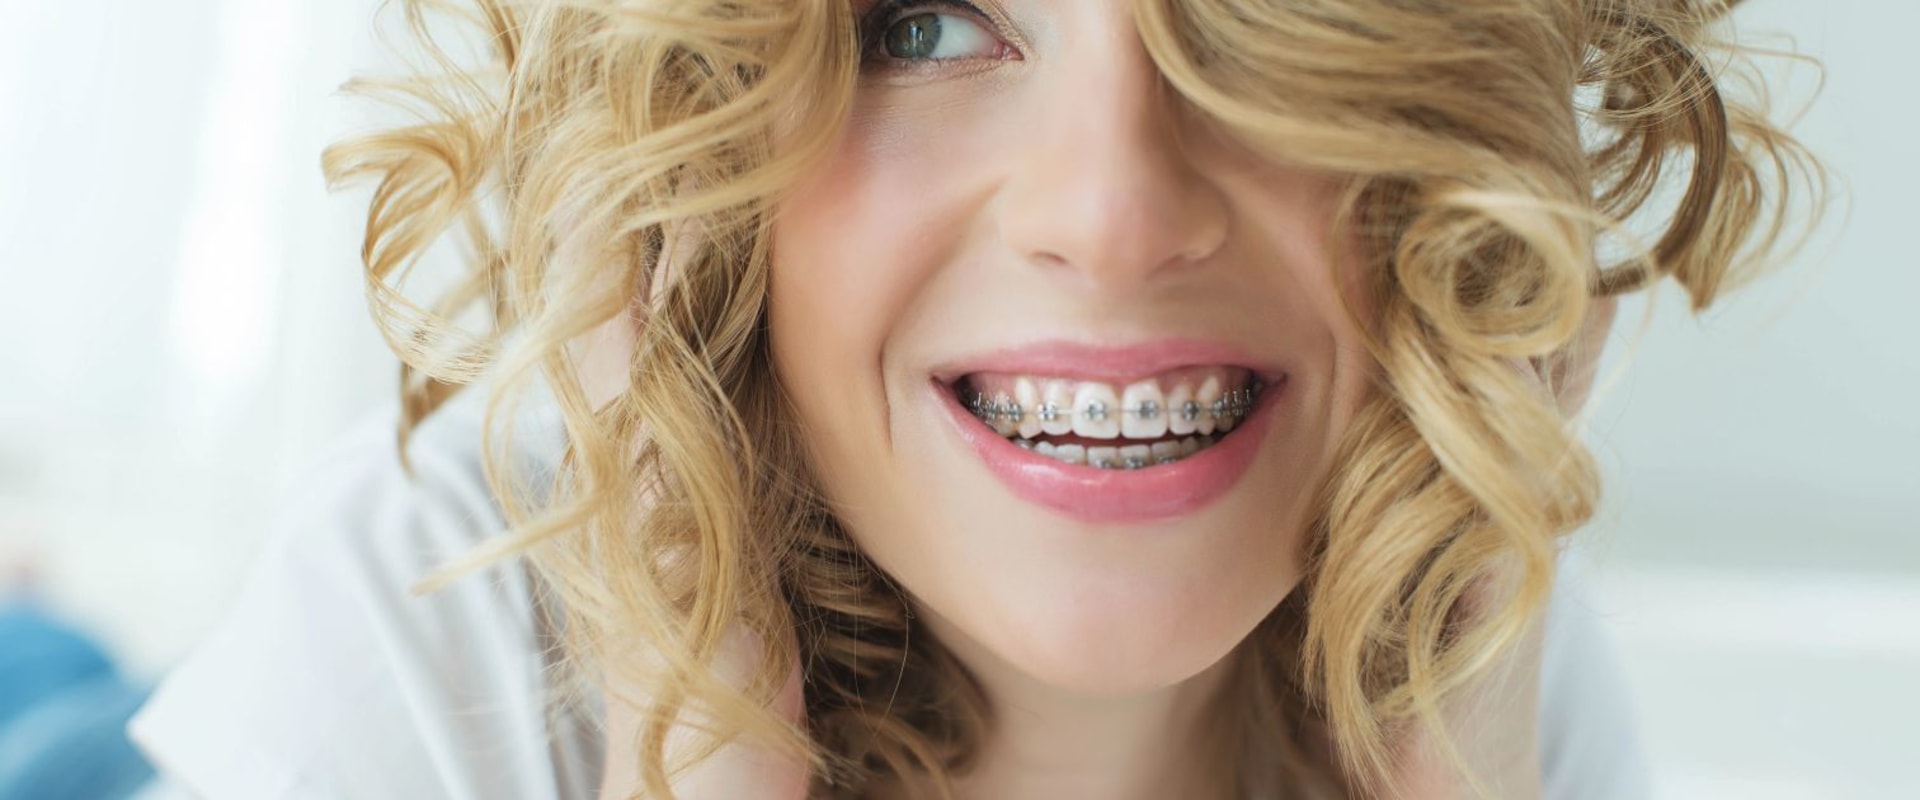 7 Tips to Make Living Easier with Braces